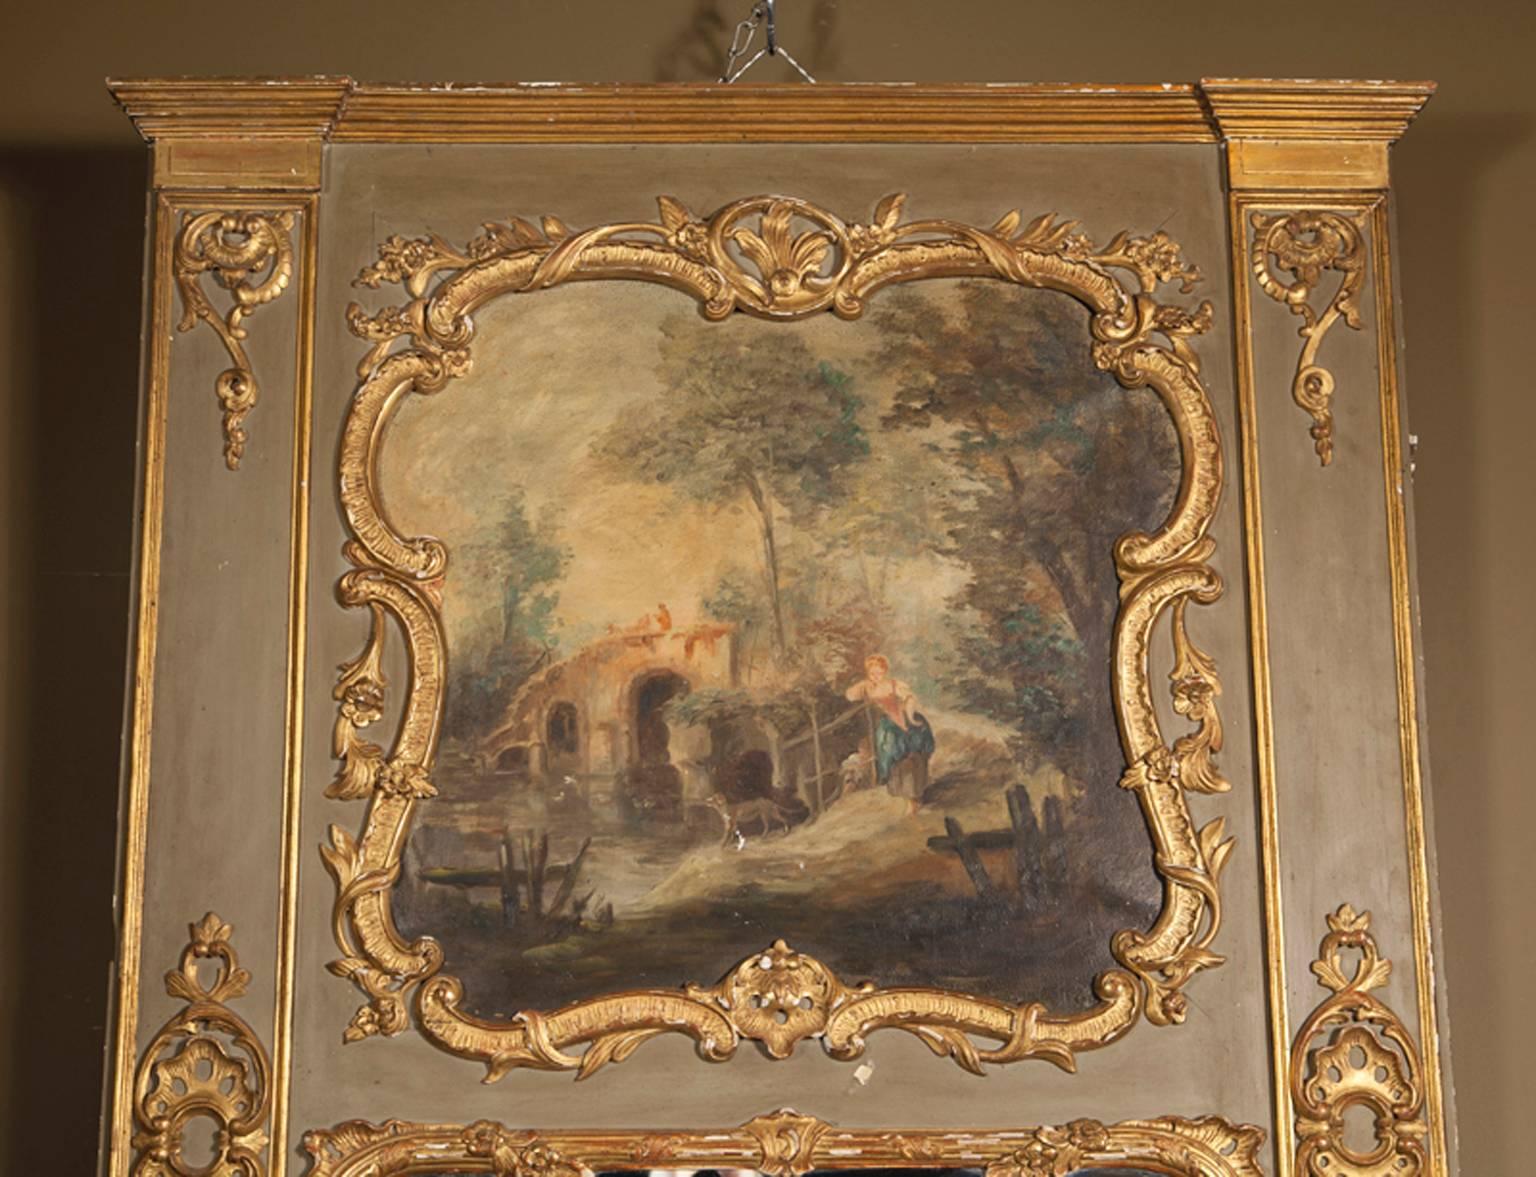 This antique trumeau, carved in the manner of Louis XVI, is oil-painted with a scene of French pastoral life in the top third, above the mirror. A barefoot French country-girl leans against a wood post fence while her dog stands on the bank of a